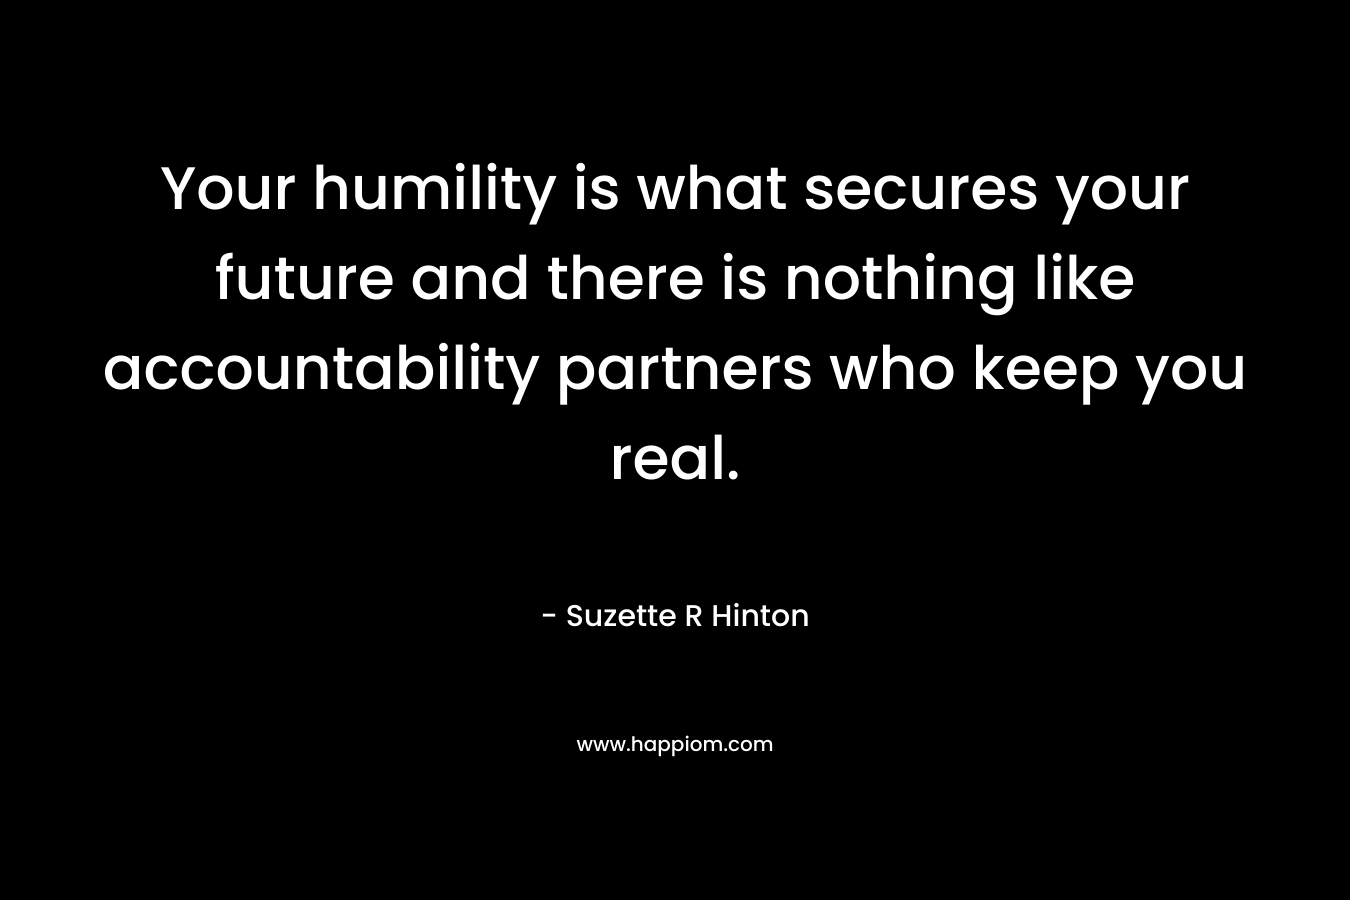 Your humility is what secures your future and there is nothing like accountability partners who keep you real.